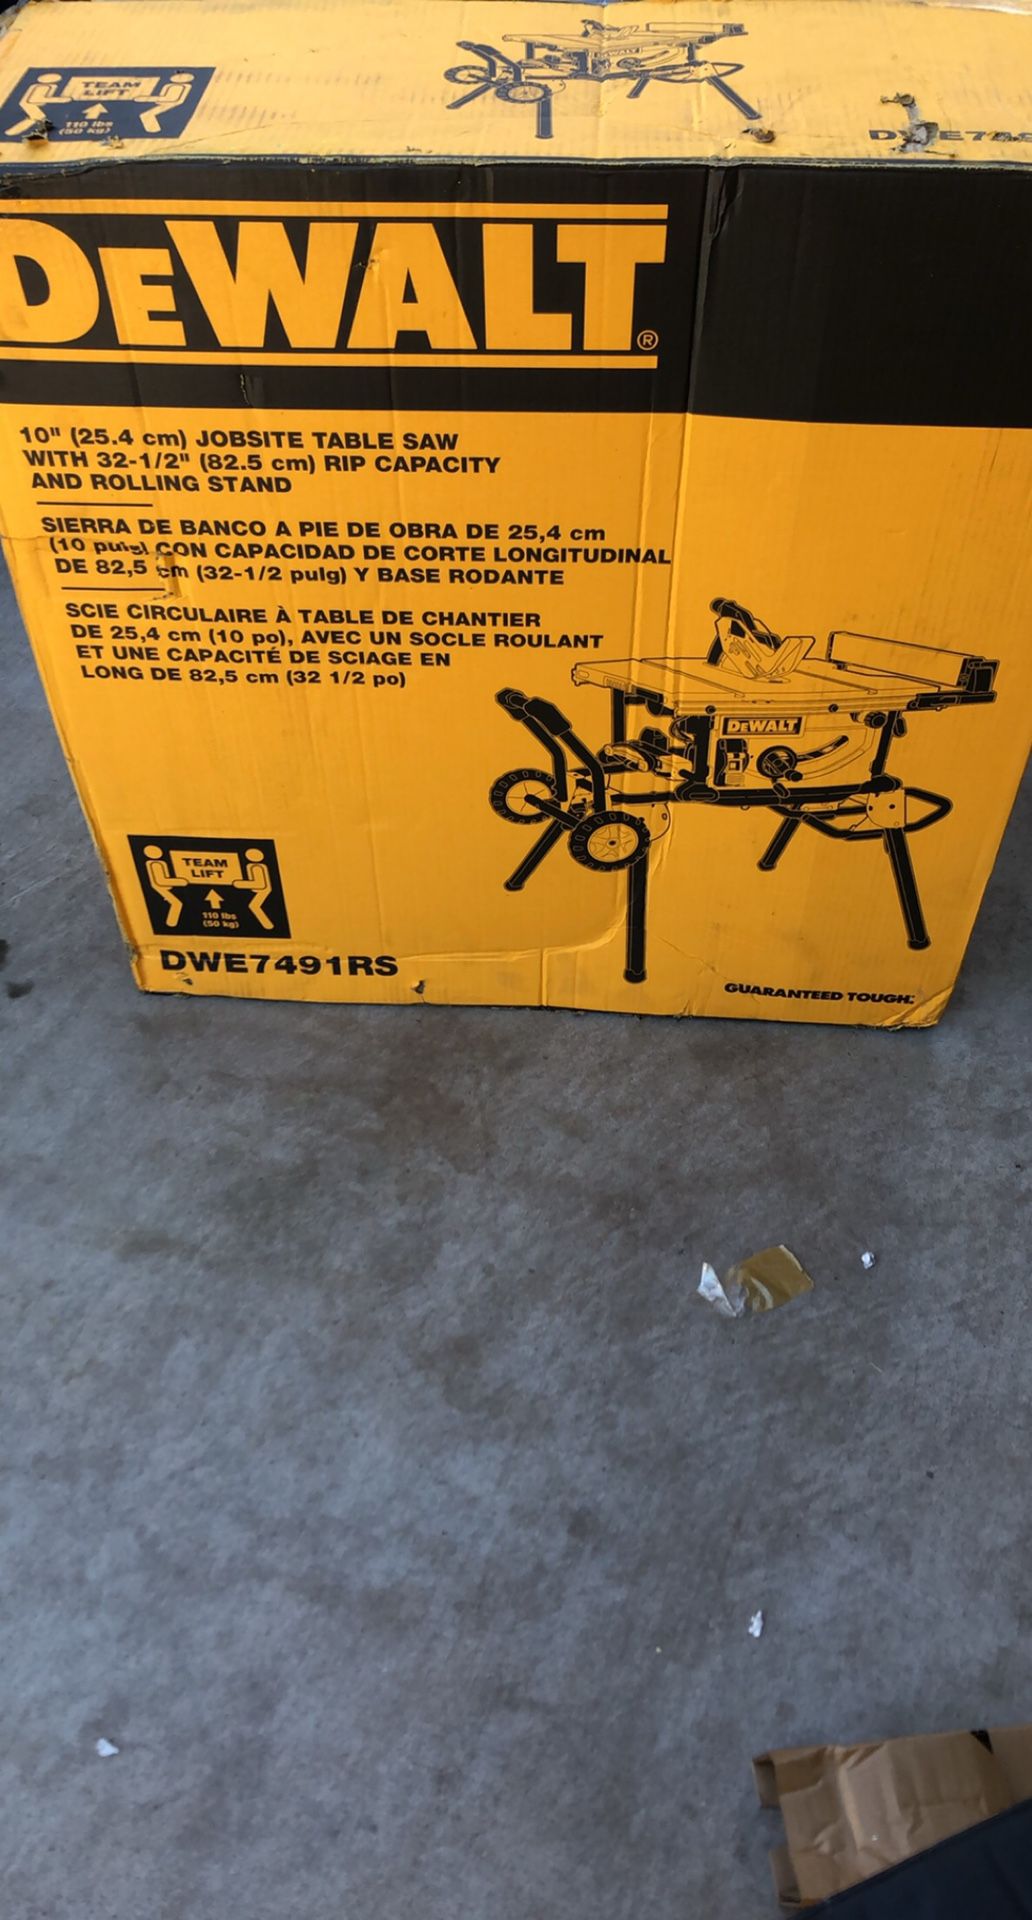 Dewalt 10 Inch Job Site Table Saw With Rolling Stand